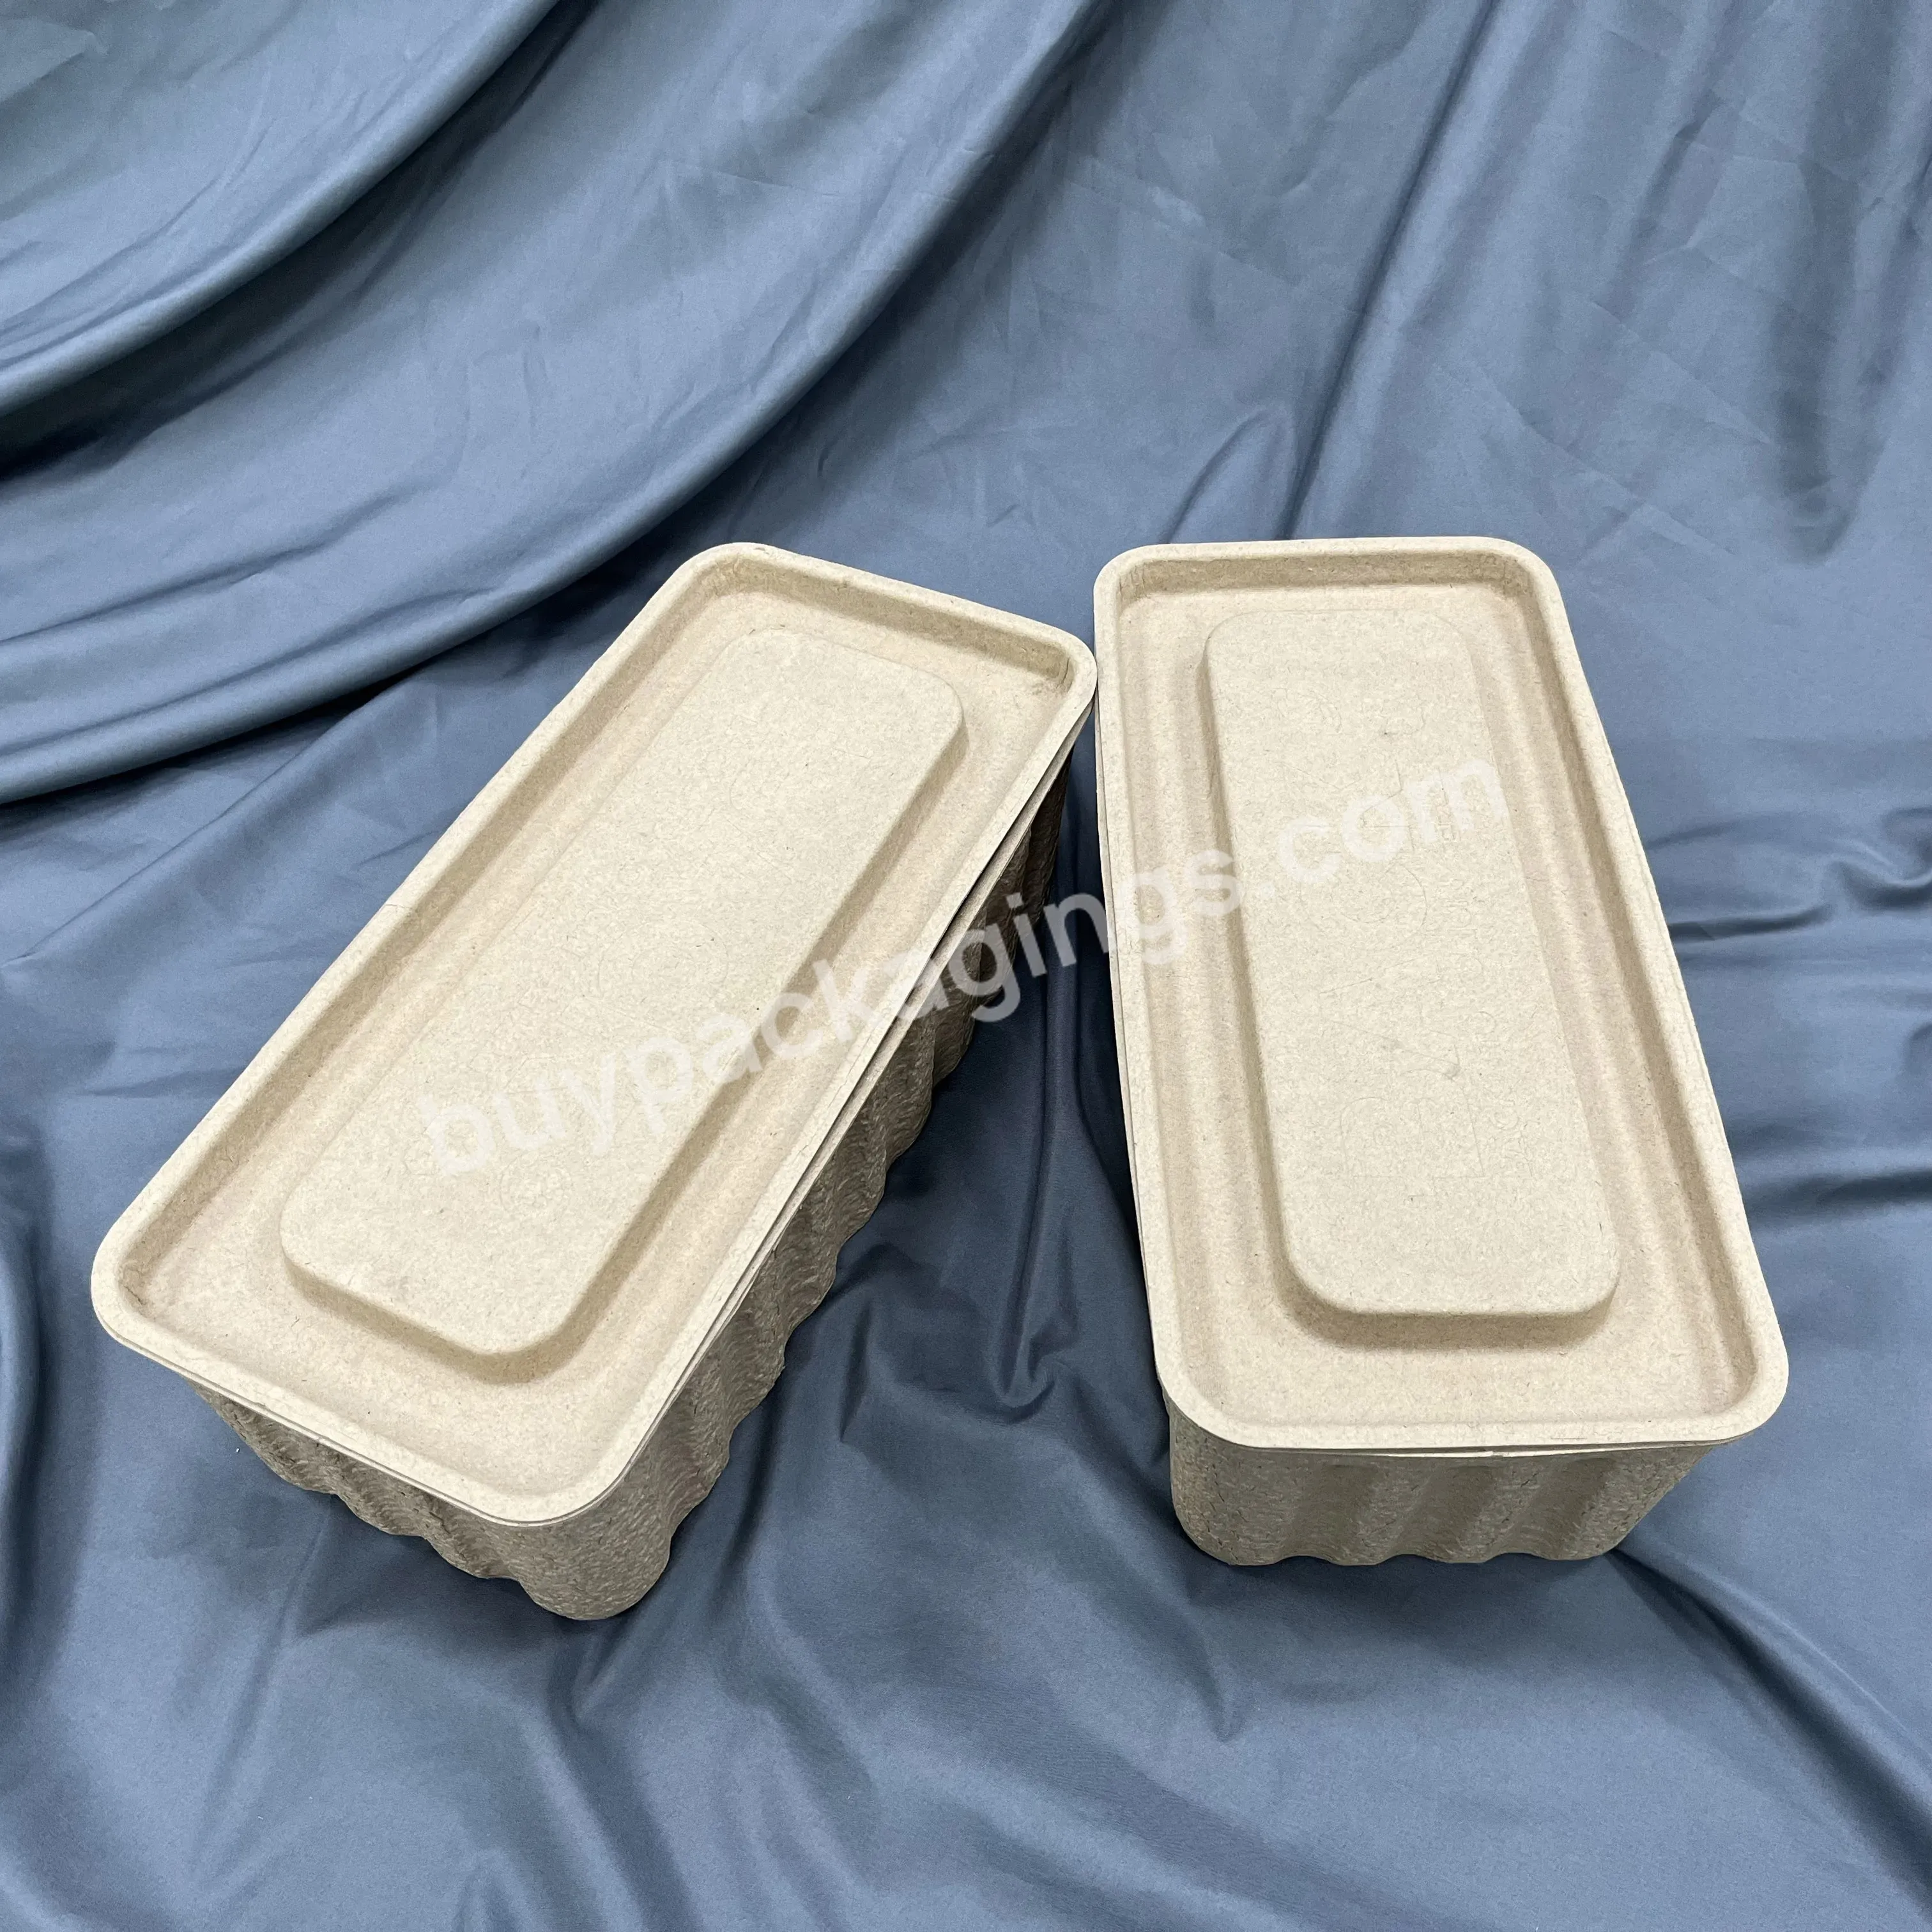 Custom Molded Pulp Packaging Snack Storage Box One Time Customization Of Cat Litter Basin Paper Pulp Packaging Manufacturer